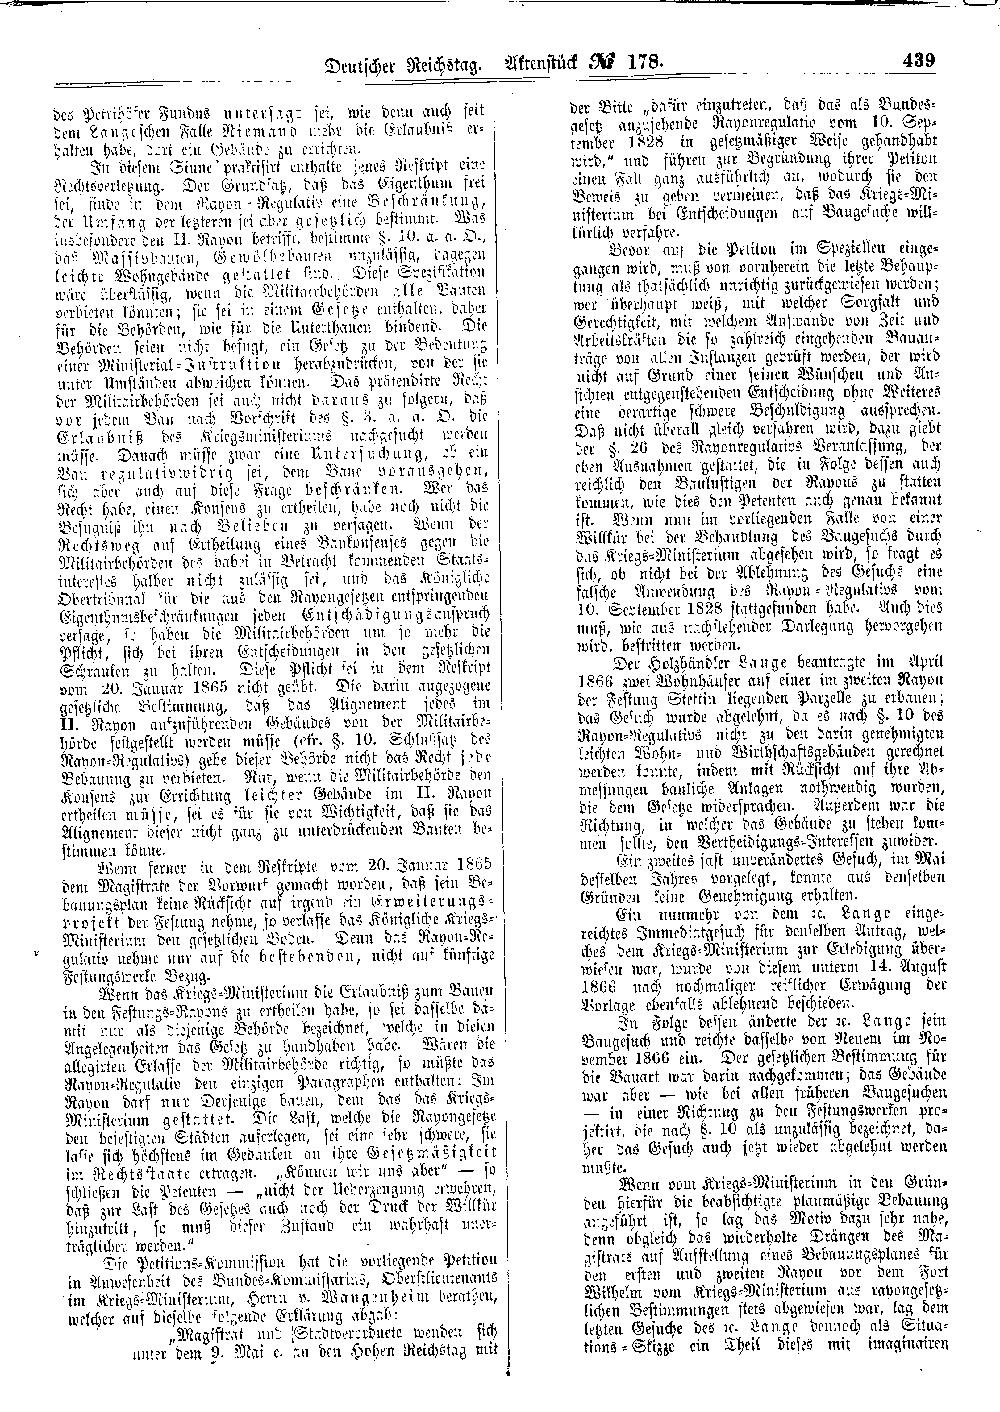 Scan of page 439